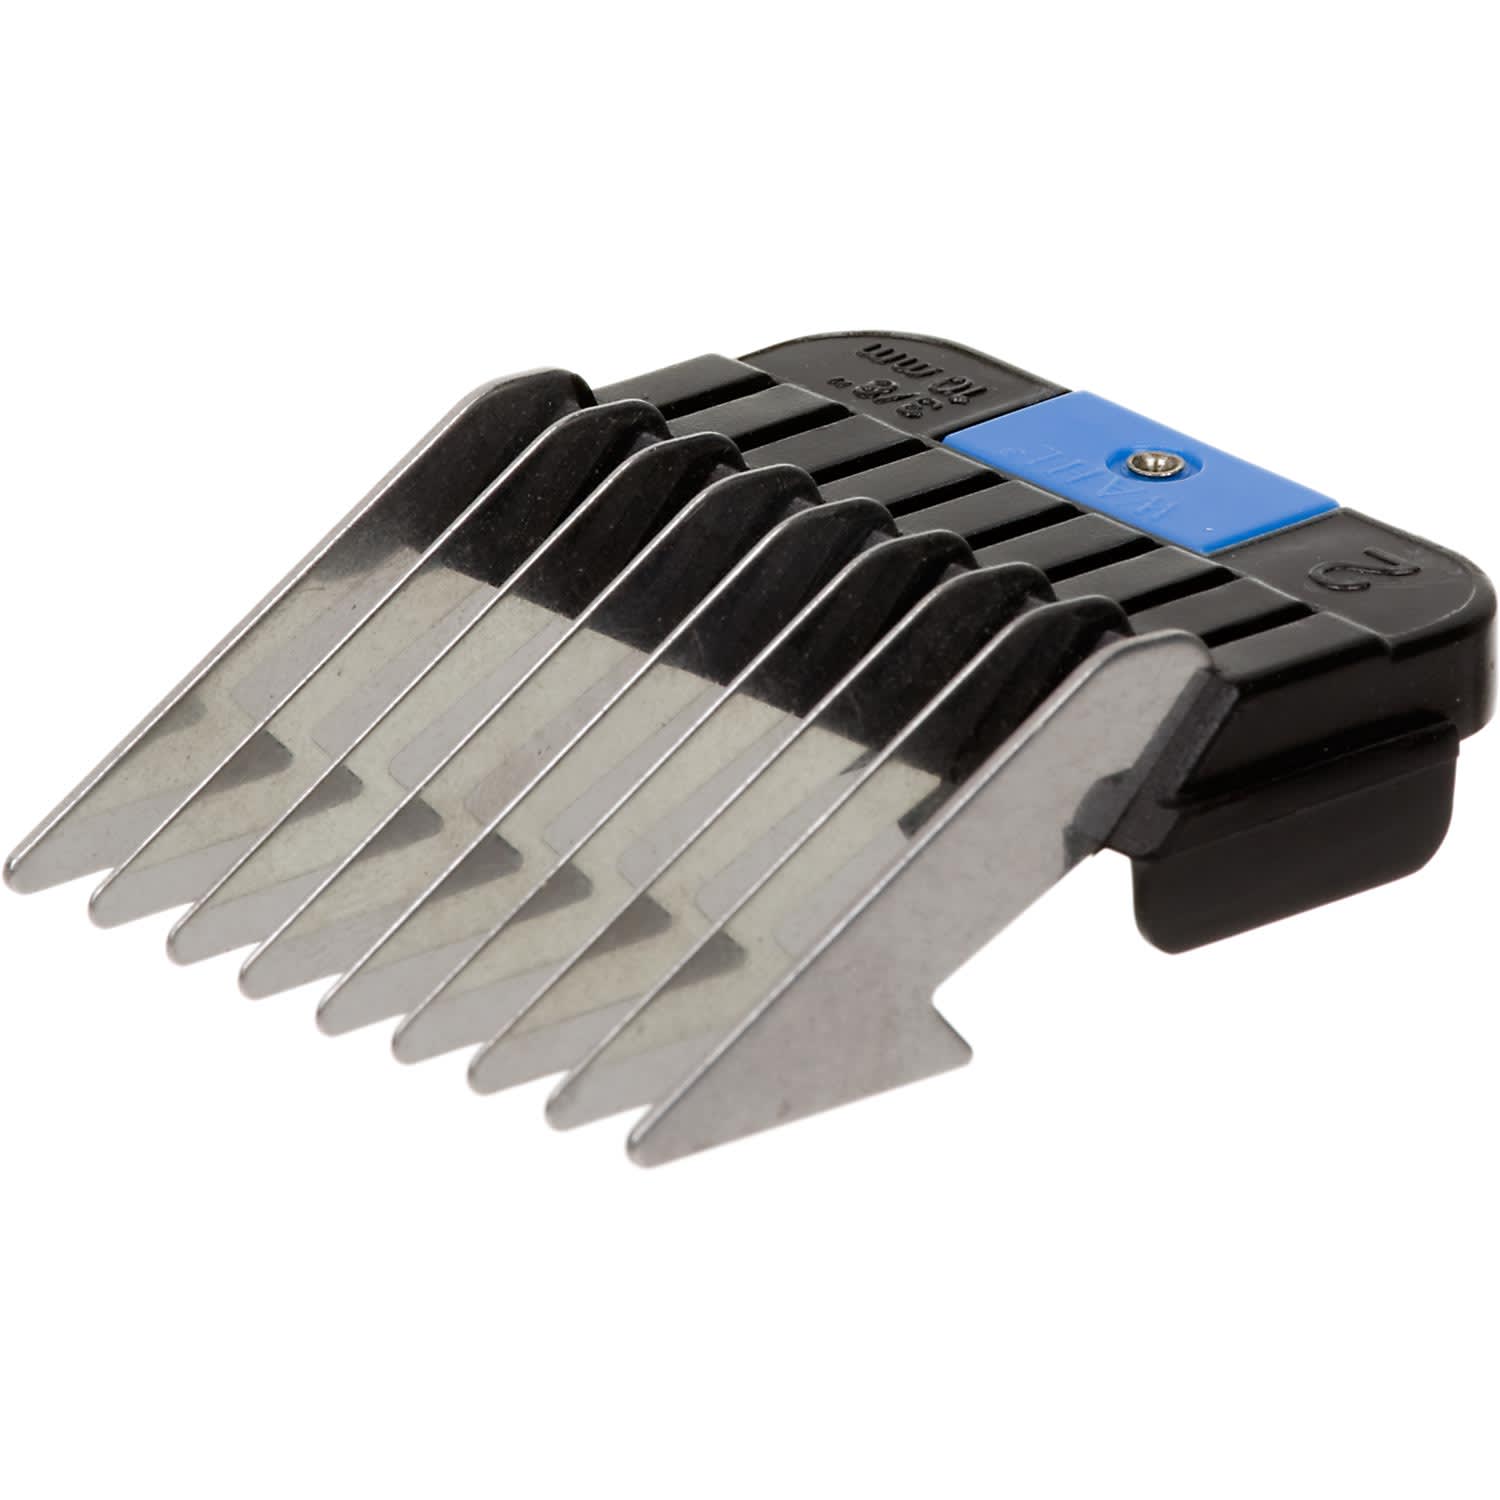 Wahl Professional Animal Stainless Steel Attachment Guide Combs For Detachable 